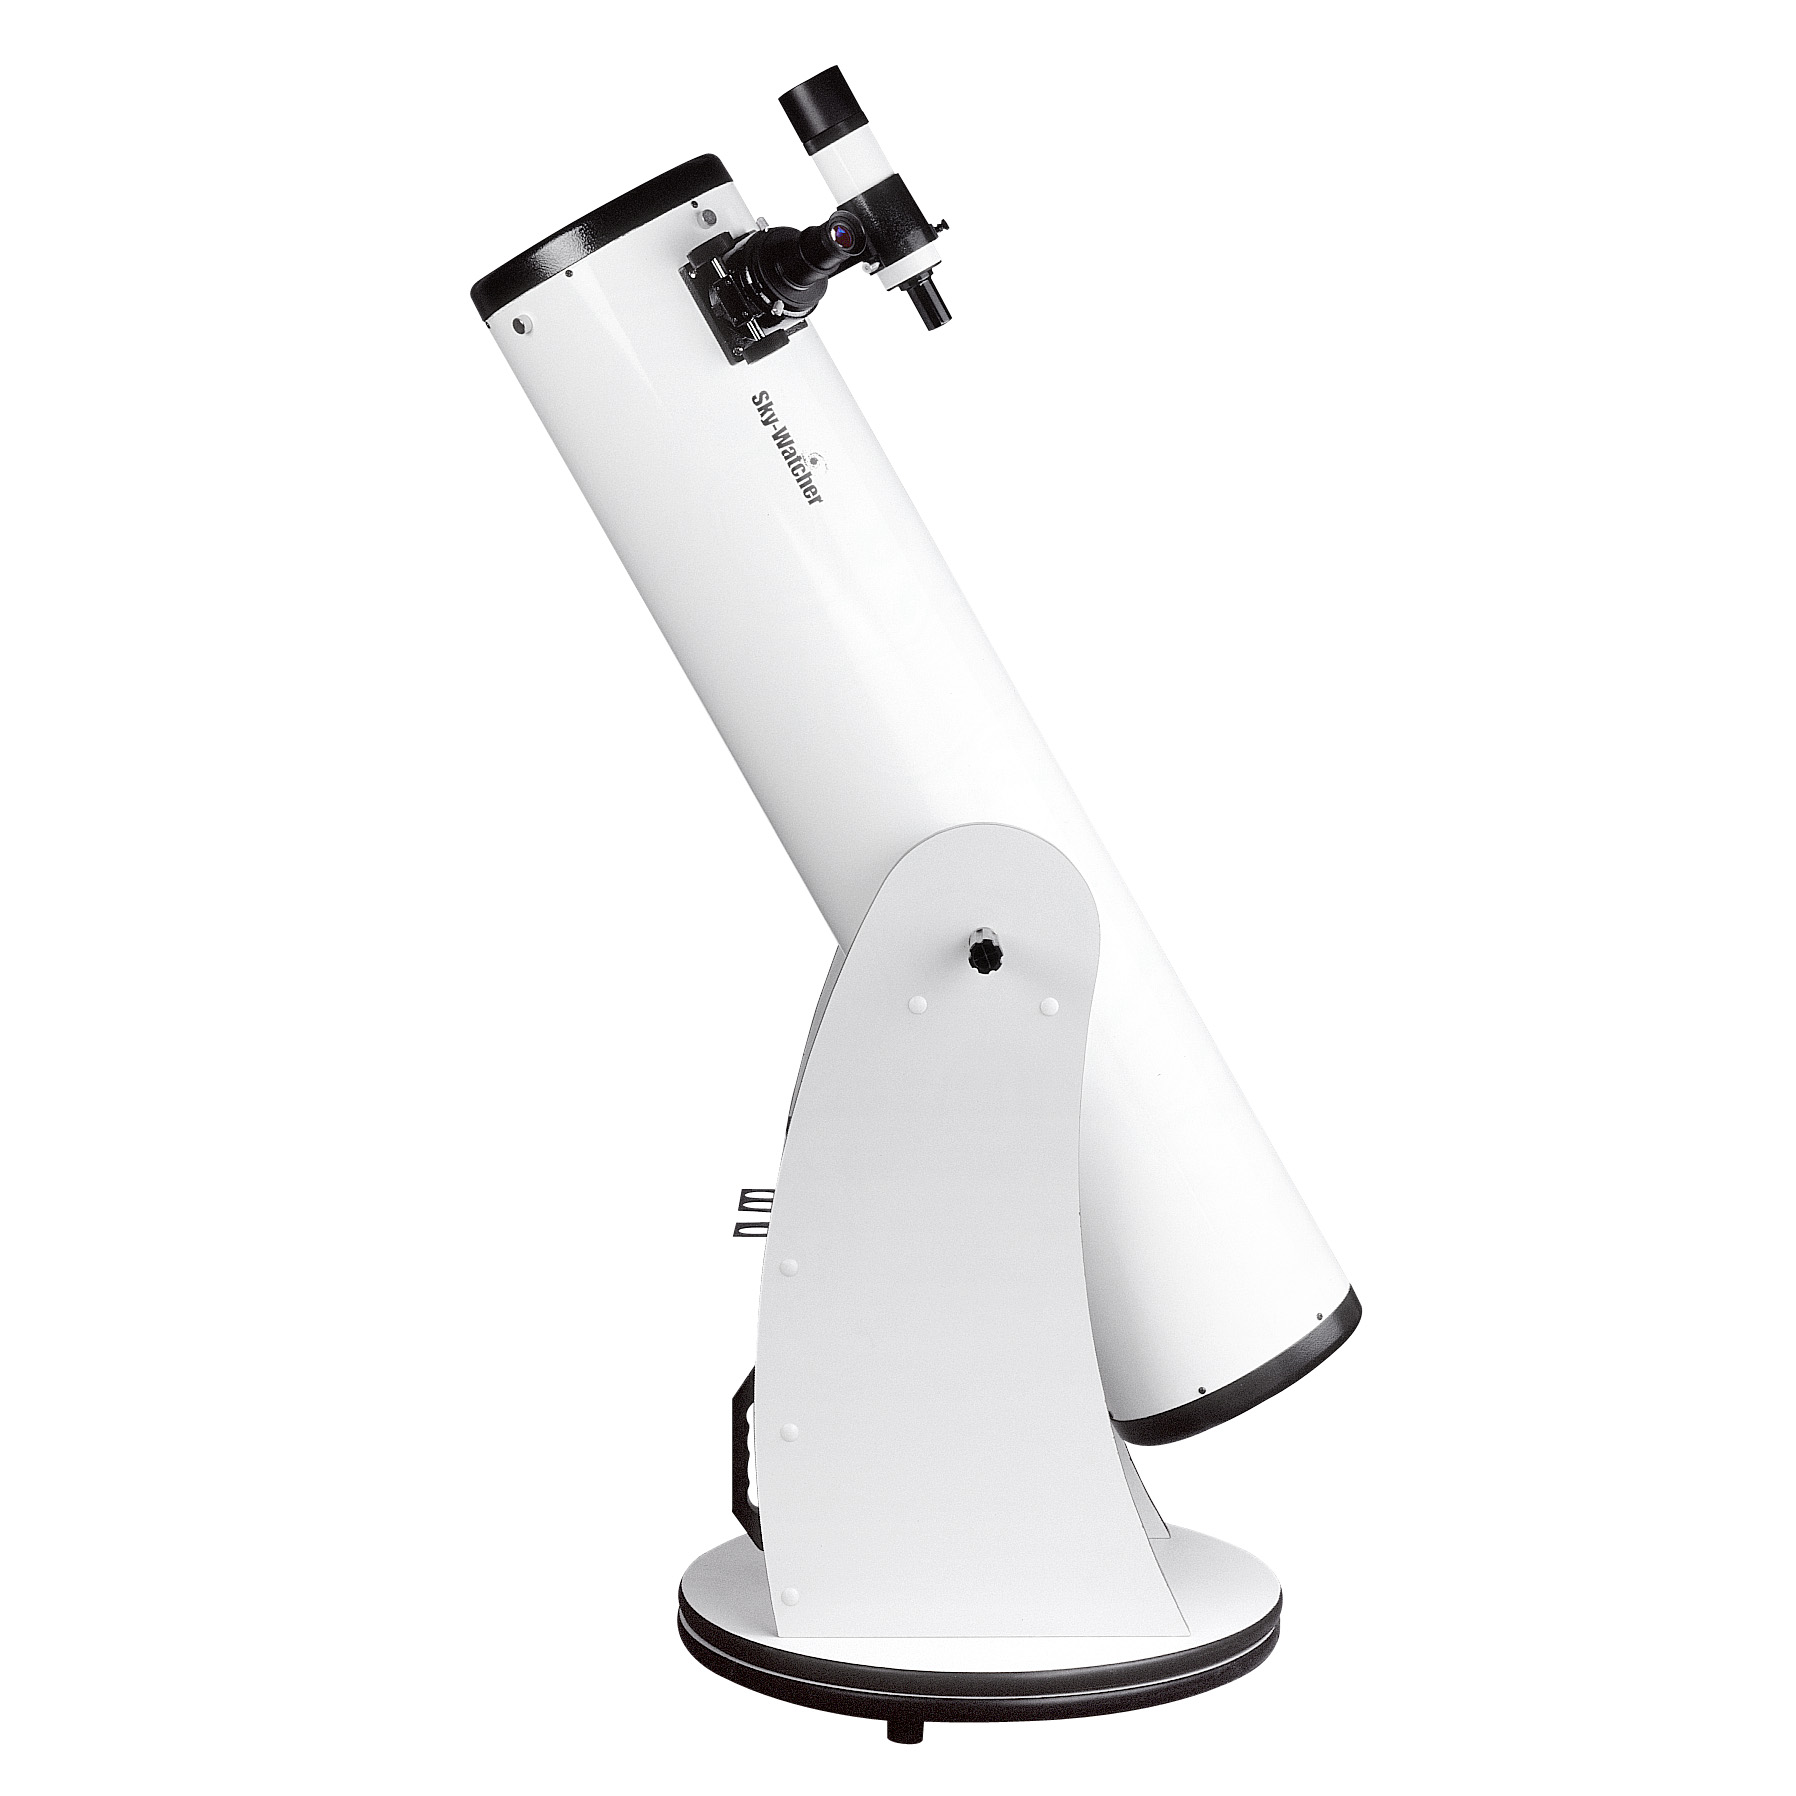 Sky-Watcher 8" Dobsonian Telescope with Tension Control - Click Image to Close